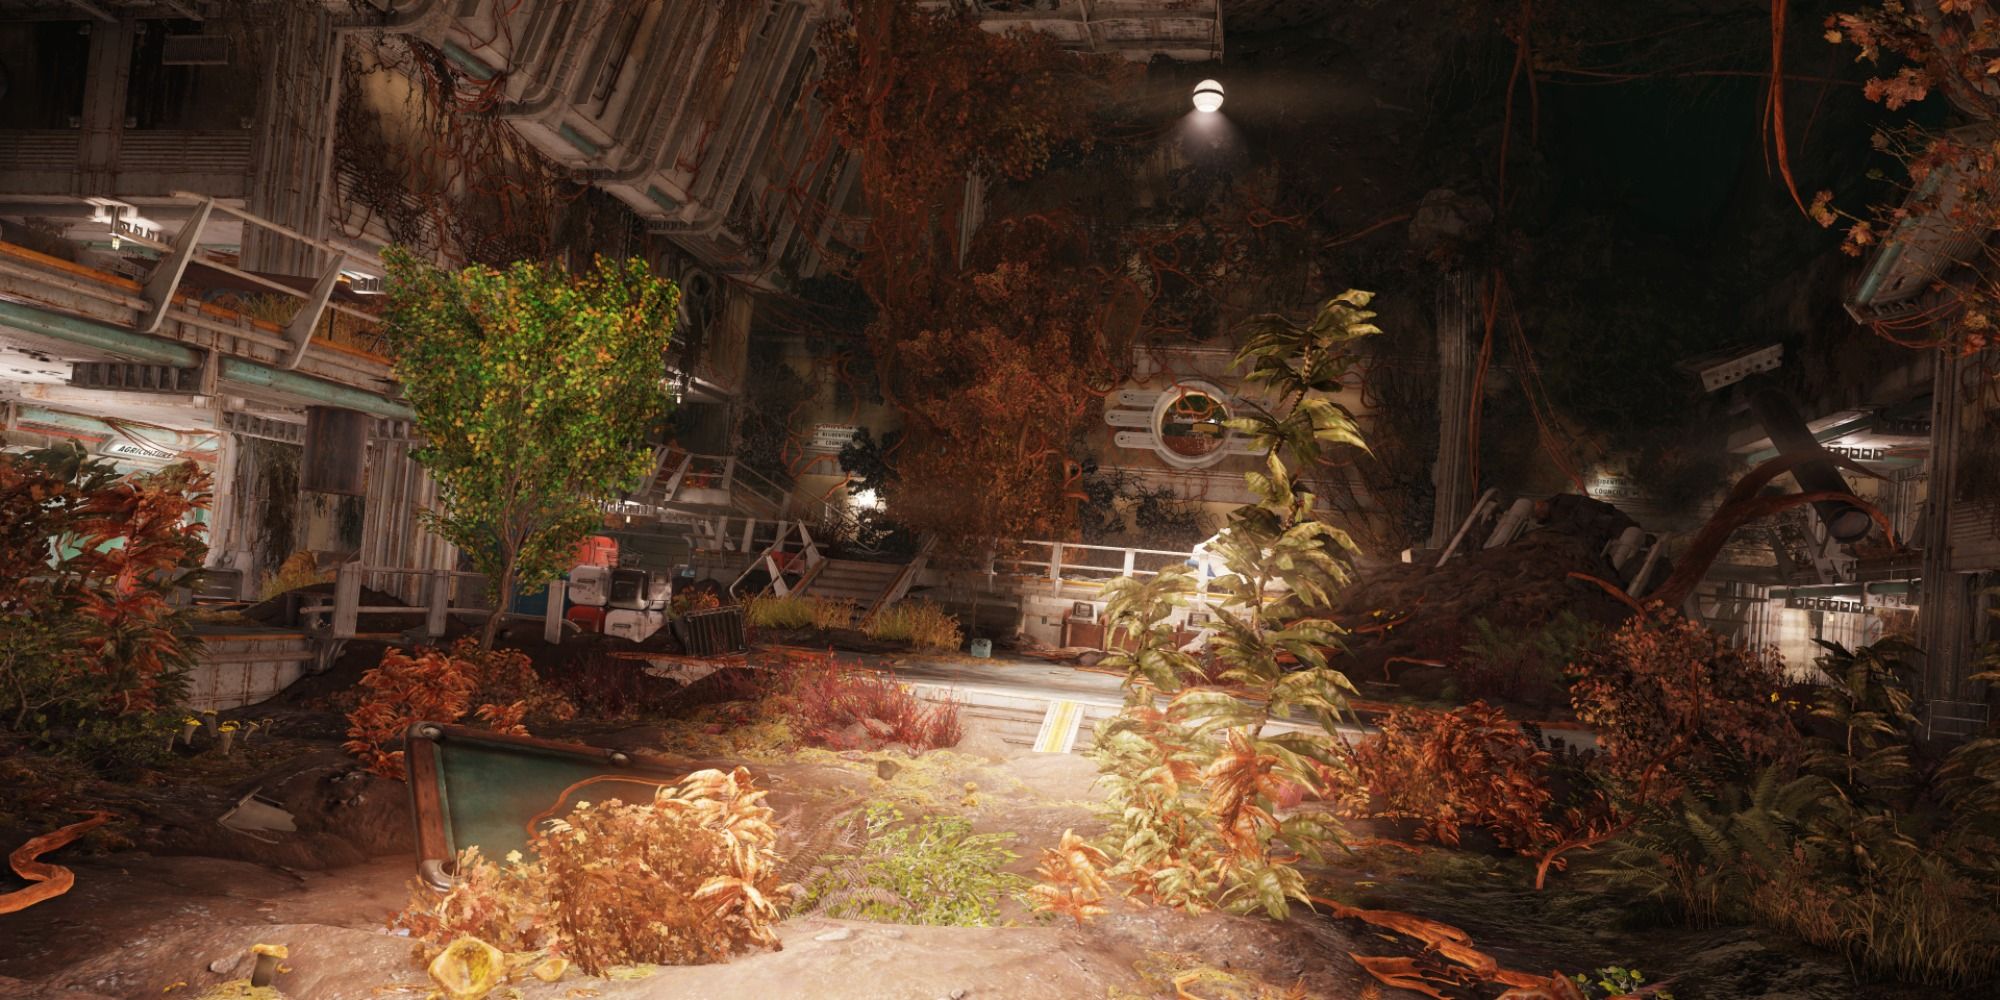 Vault 94 inside with plants overgrown throughout